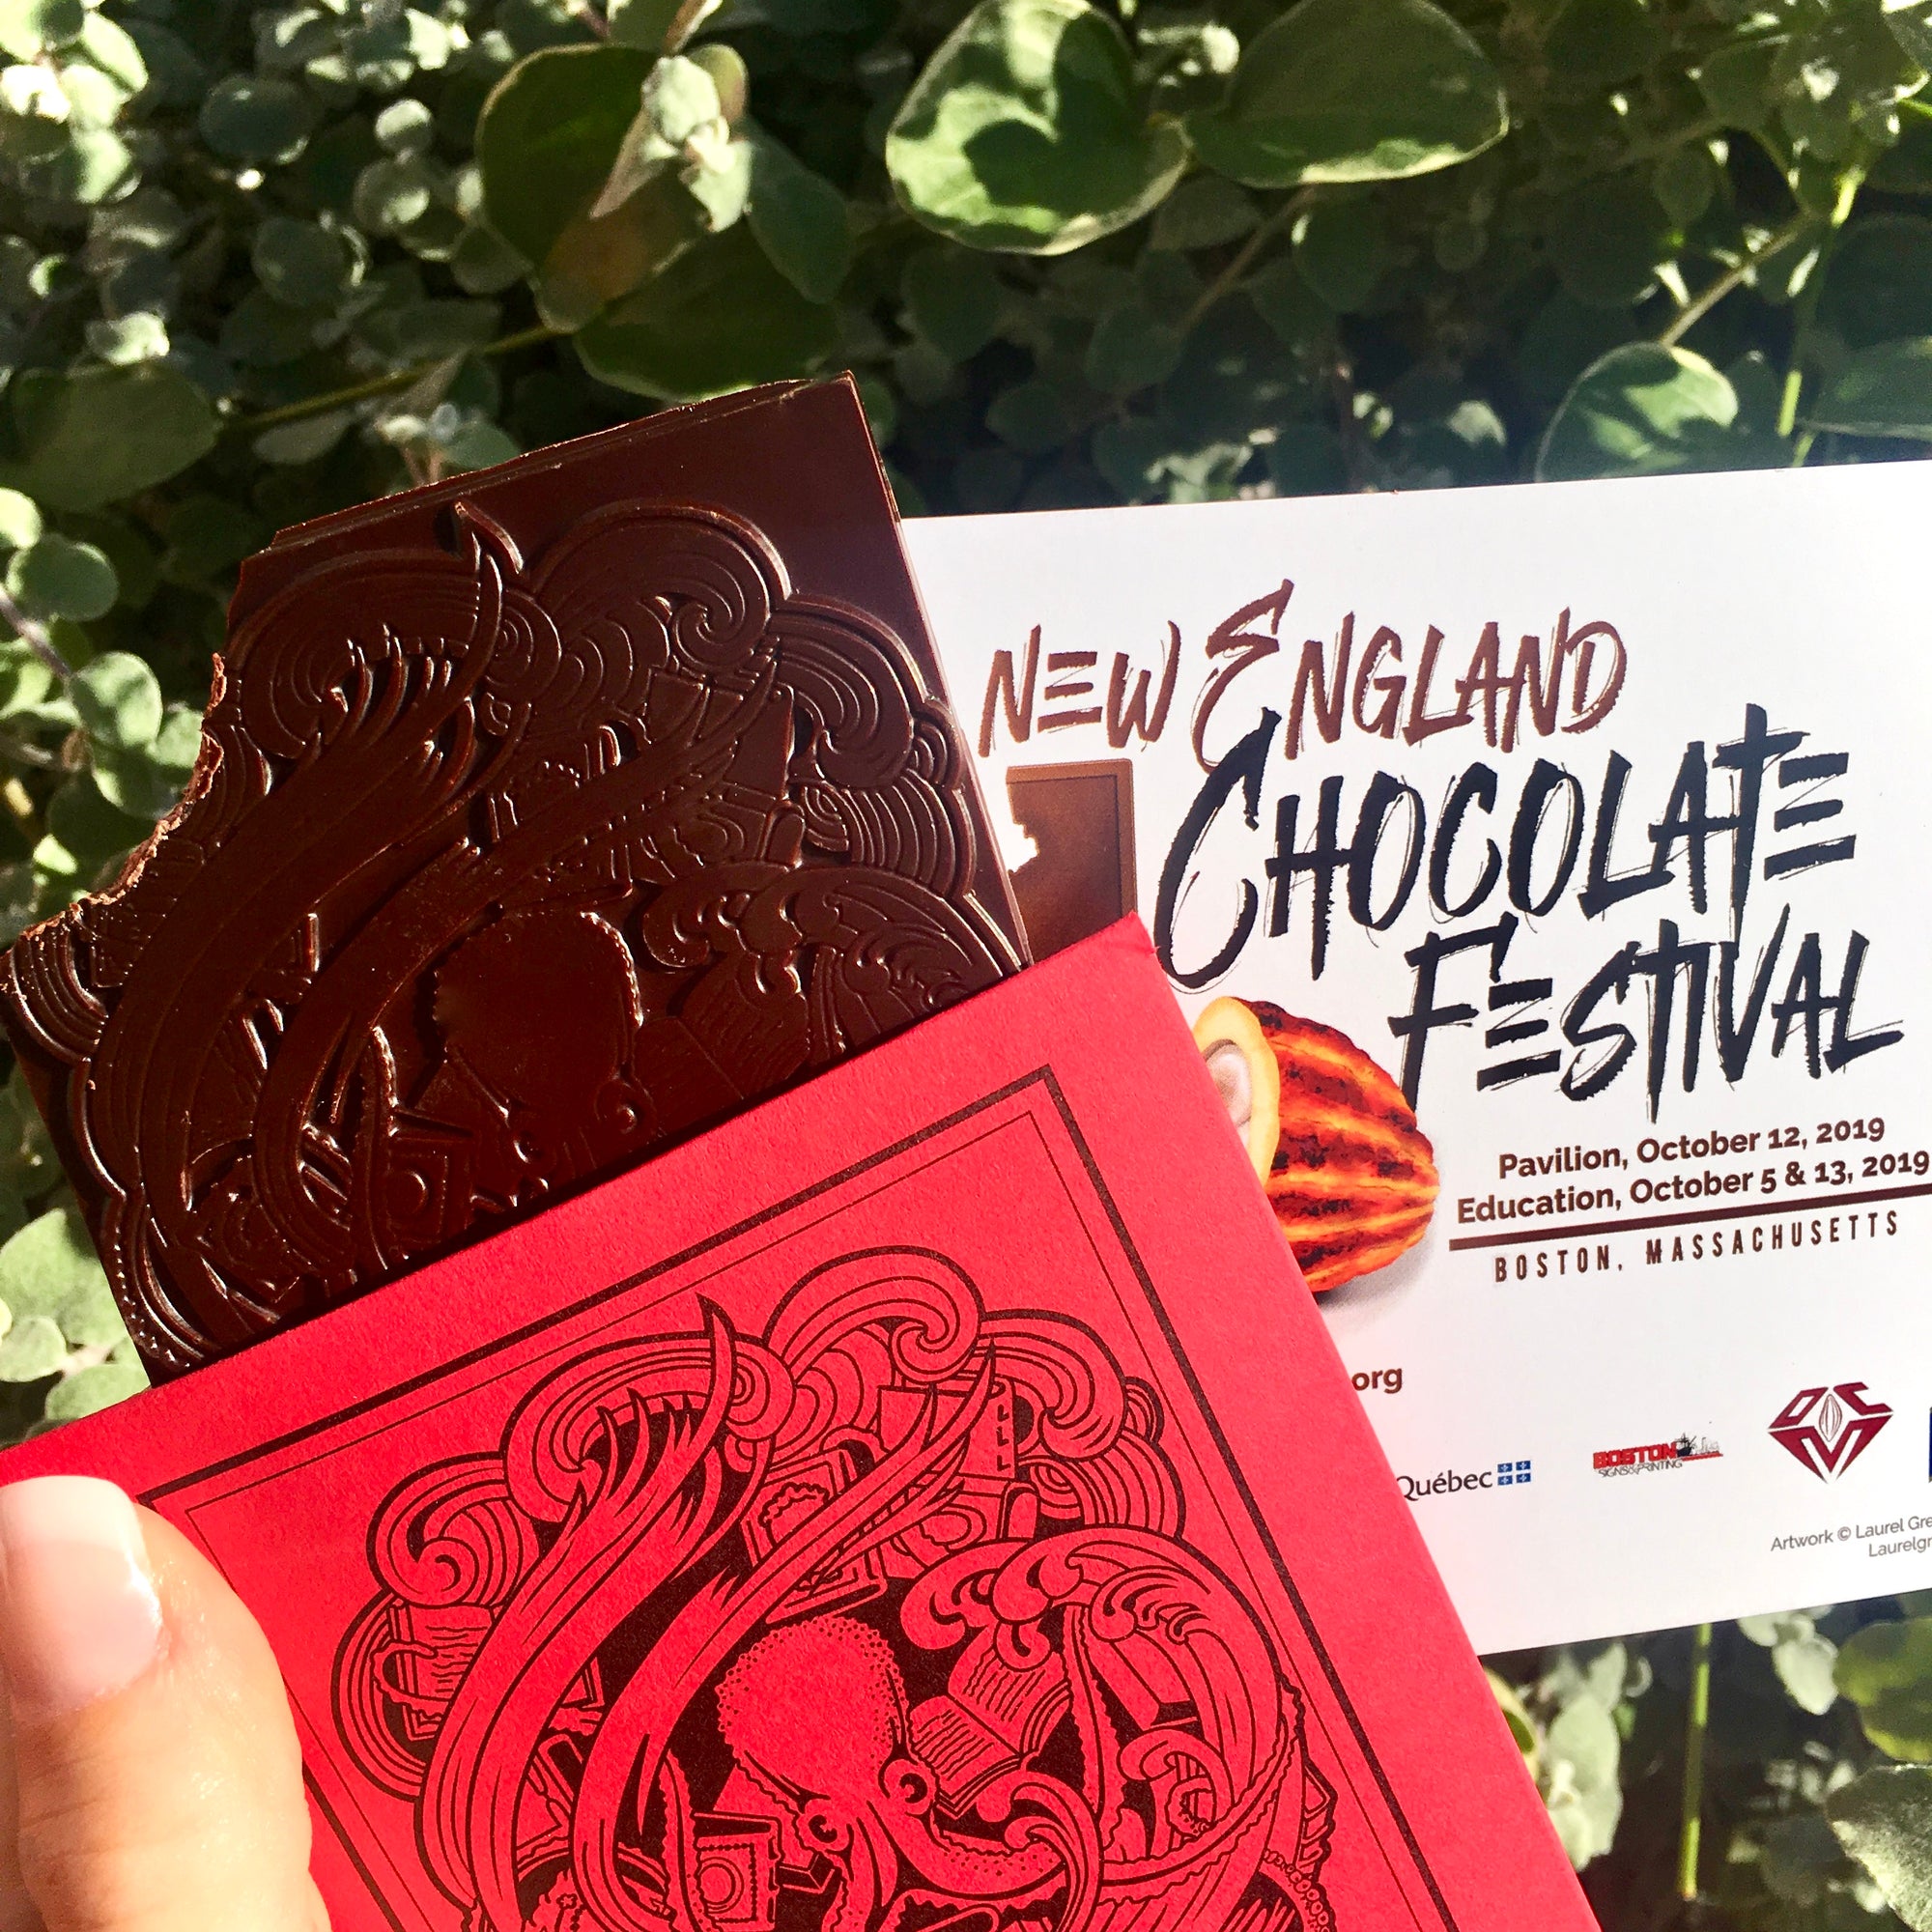 Chocolate Festival Ticket Giveaway!!